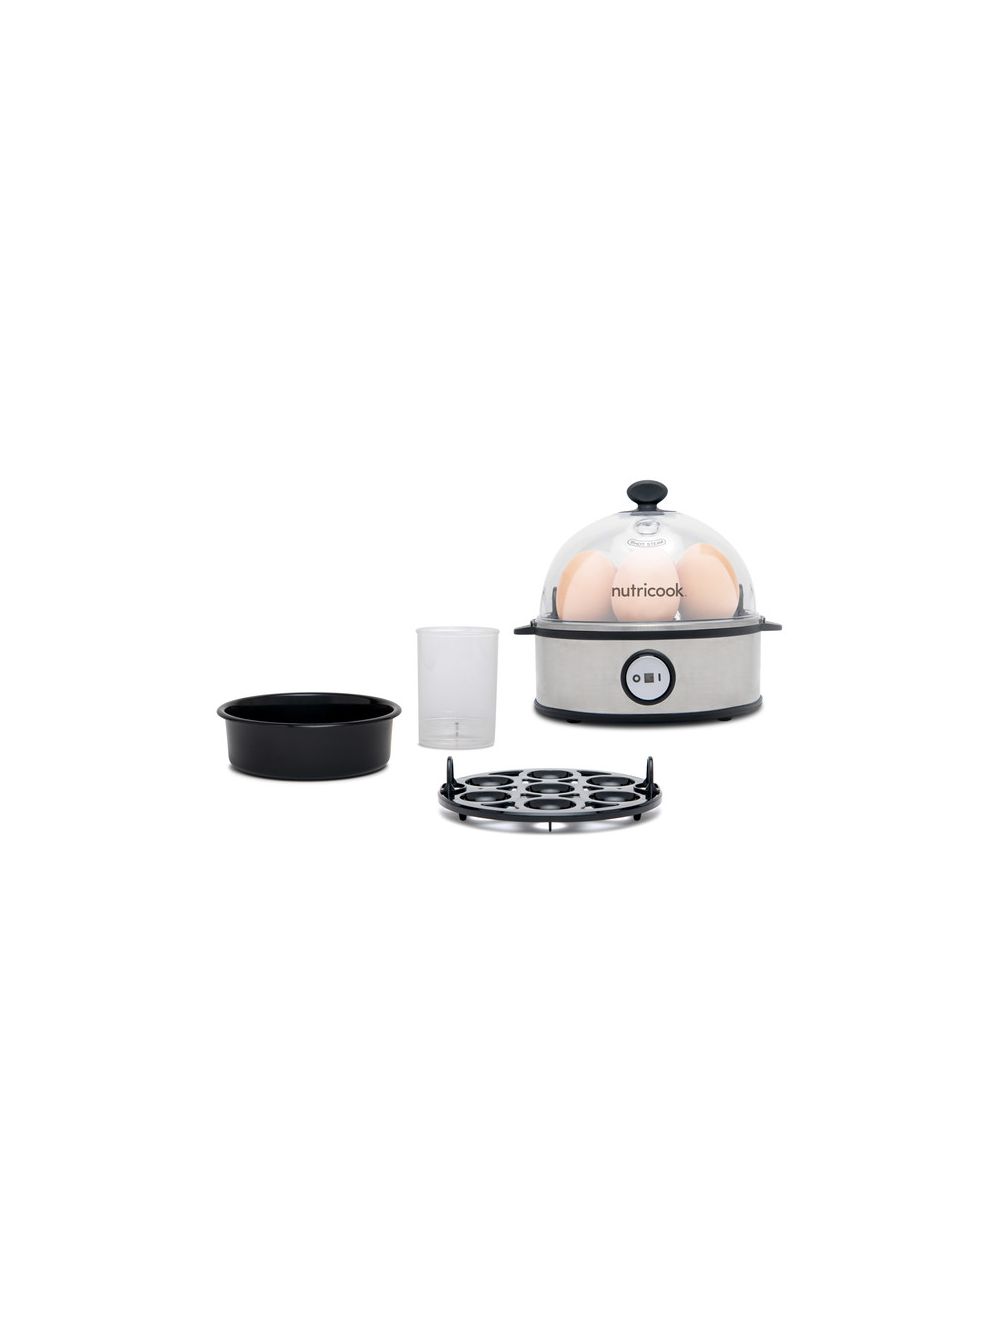 Nutricook Rapid Electric Egg Cooker